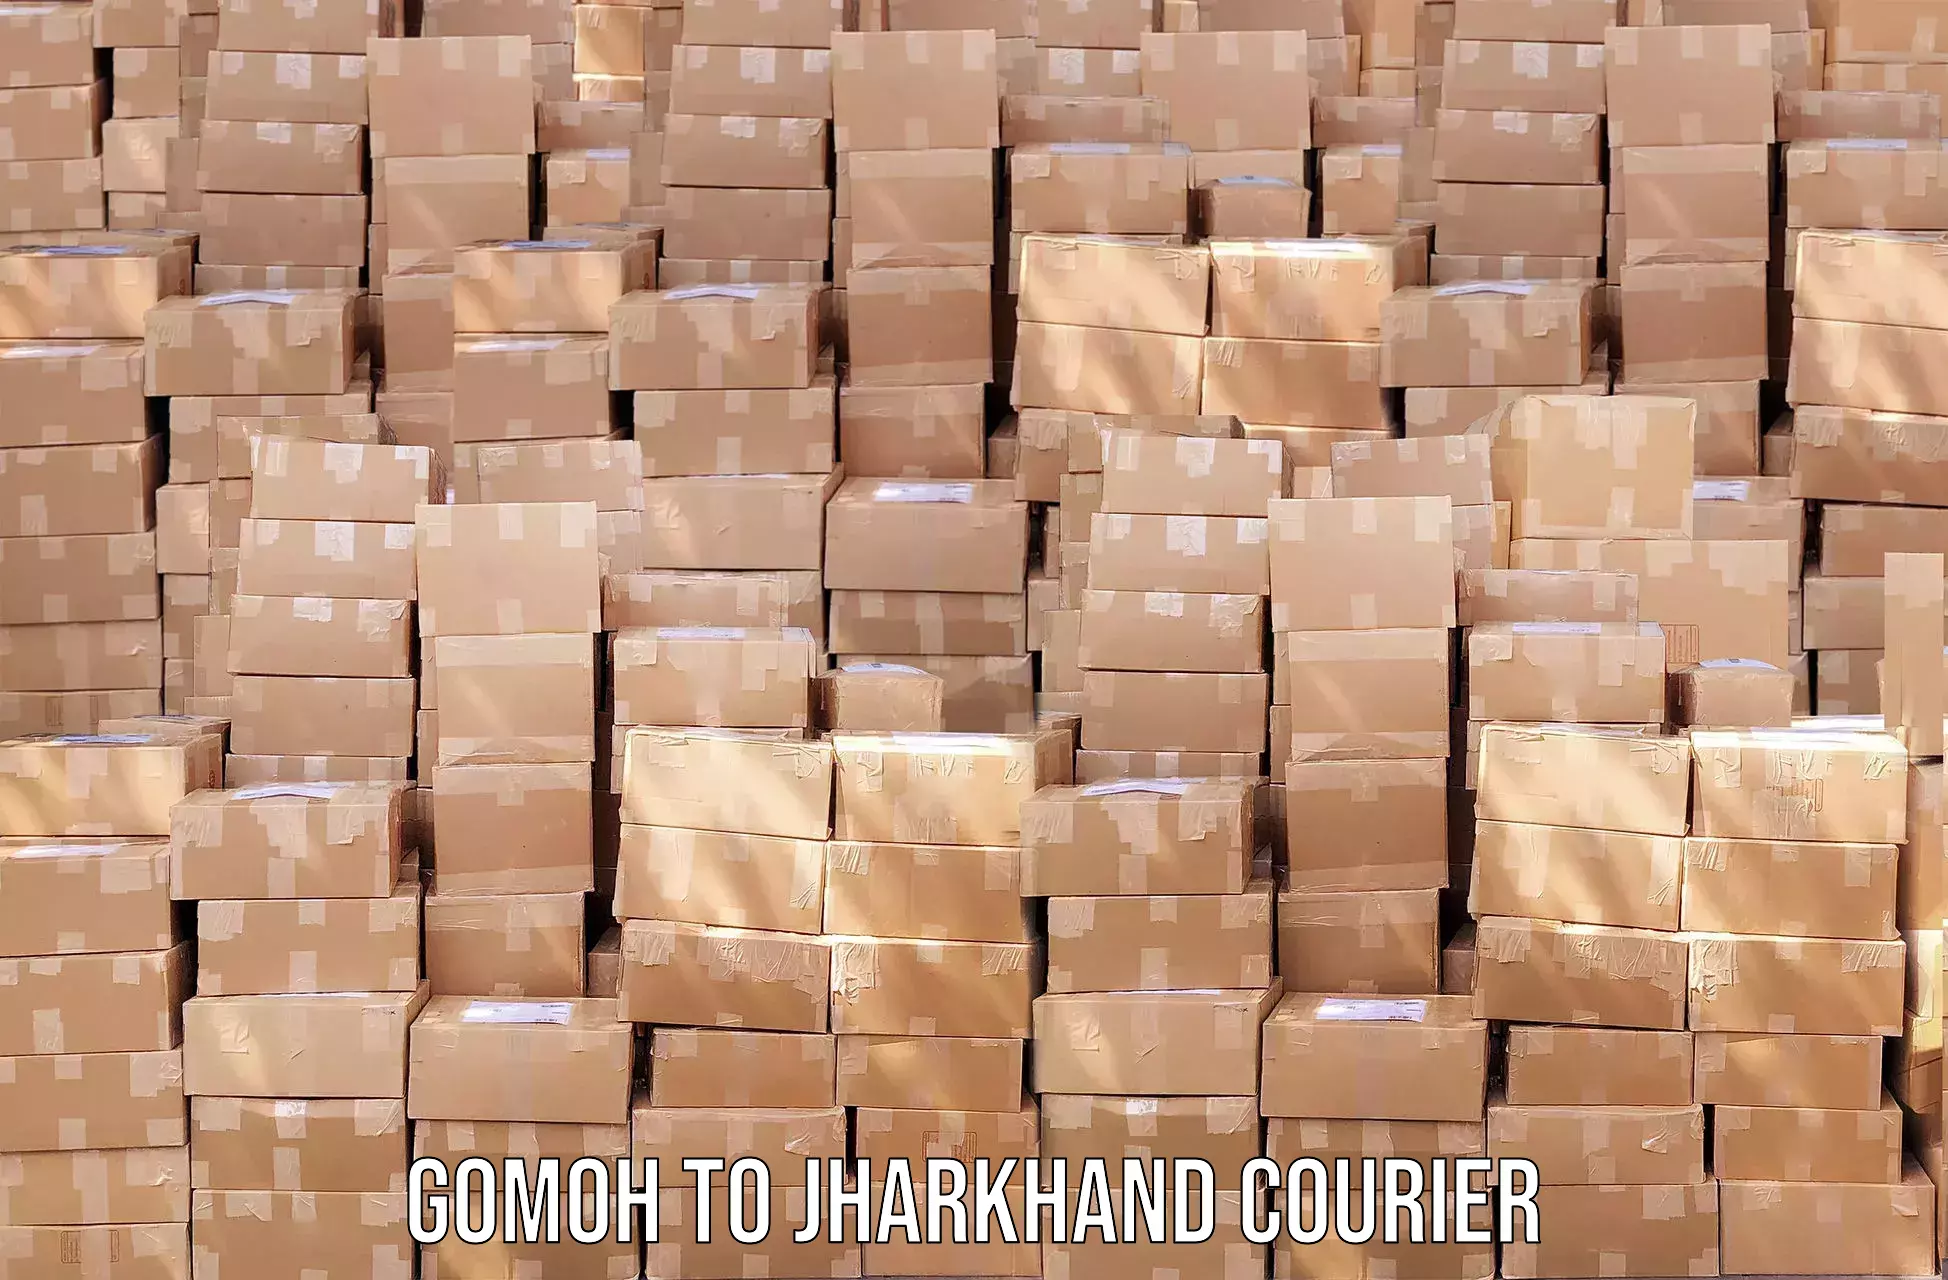 Courier service partnerships Gomoh to Chatra